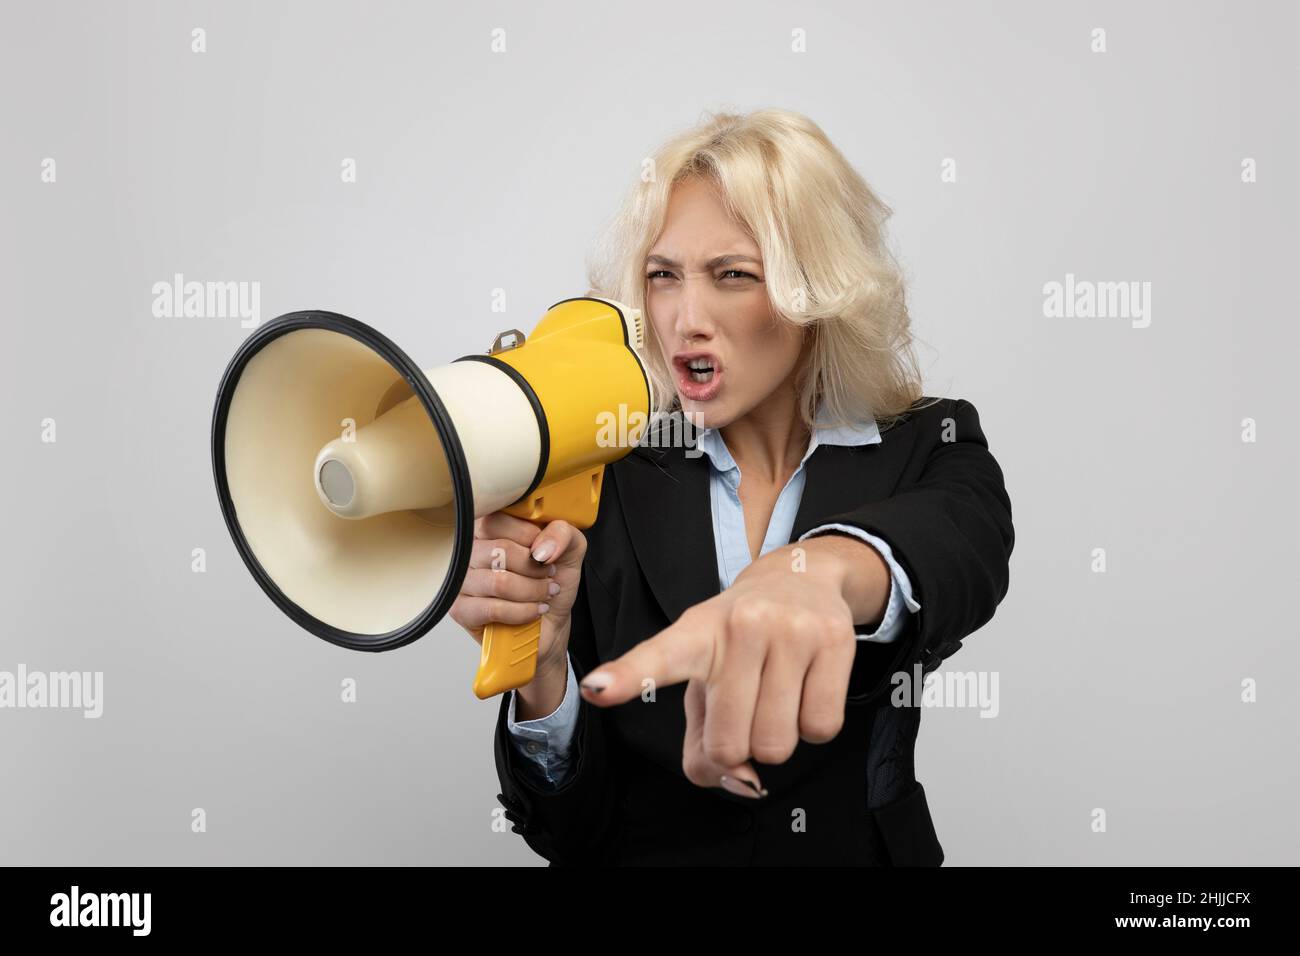 Agitated businesswoman in formalwear shouting into megaphone and pointing finger, posing on grey background Stock Photo